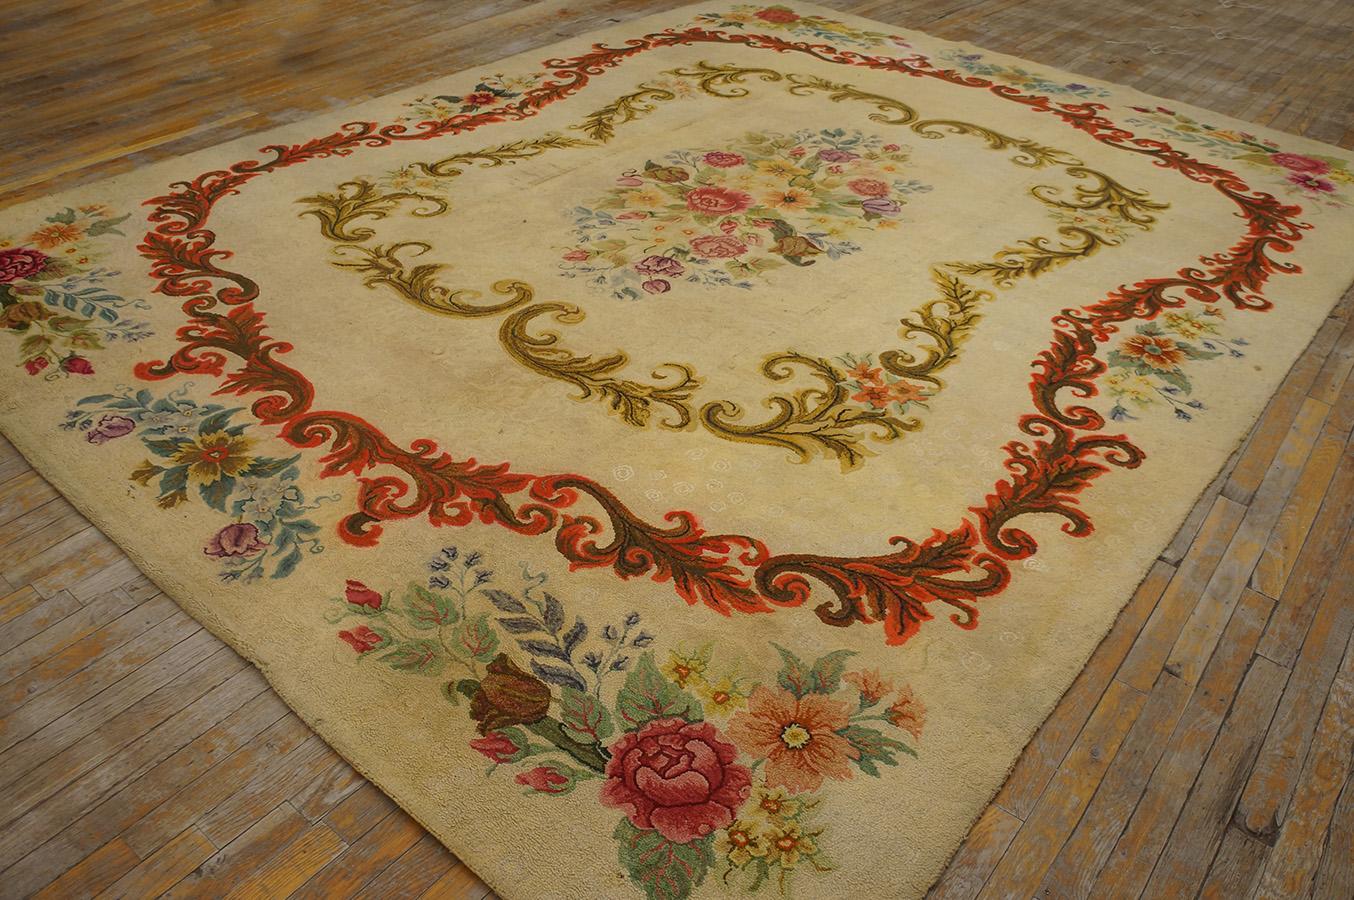 Hand-Woven 1930s American Hooked Rug ( 9' x 11'8